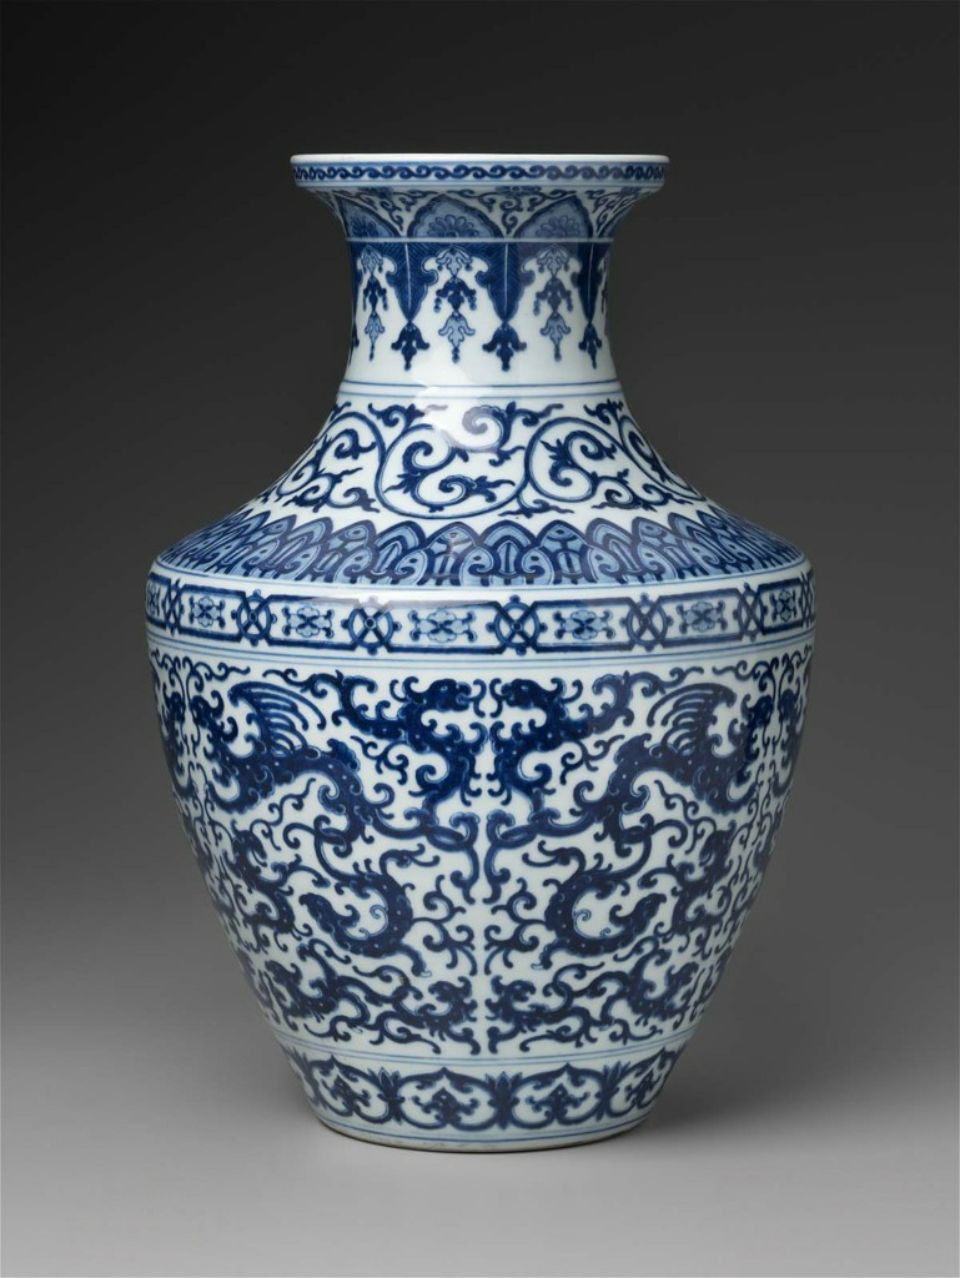 11 Fantastic Ancient Chinese Porcelain Vase 2024 free download ancient chinese porcelain vase of rp vase with blue white phoenix winged dragons chinese qing intended for rp vase with blue white phoenix winged dragons chinese qing dynasty qianlong period